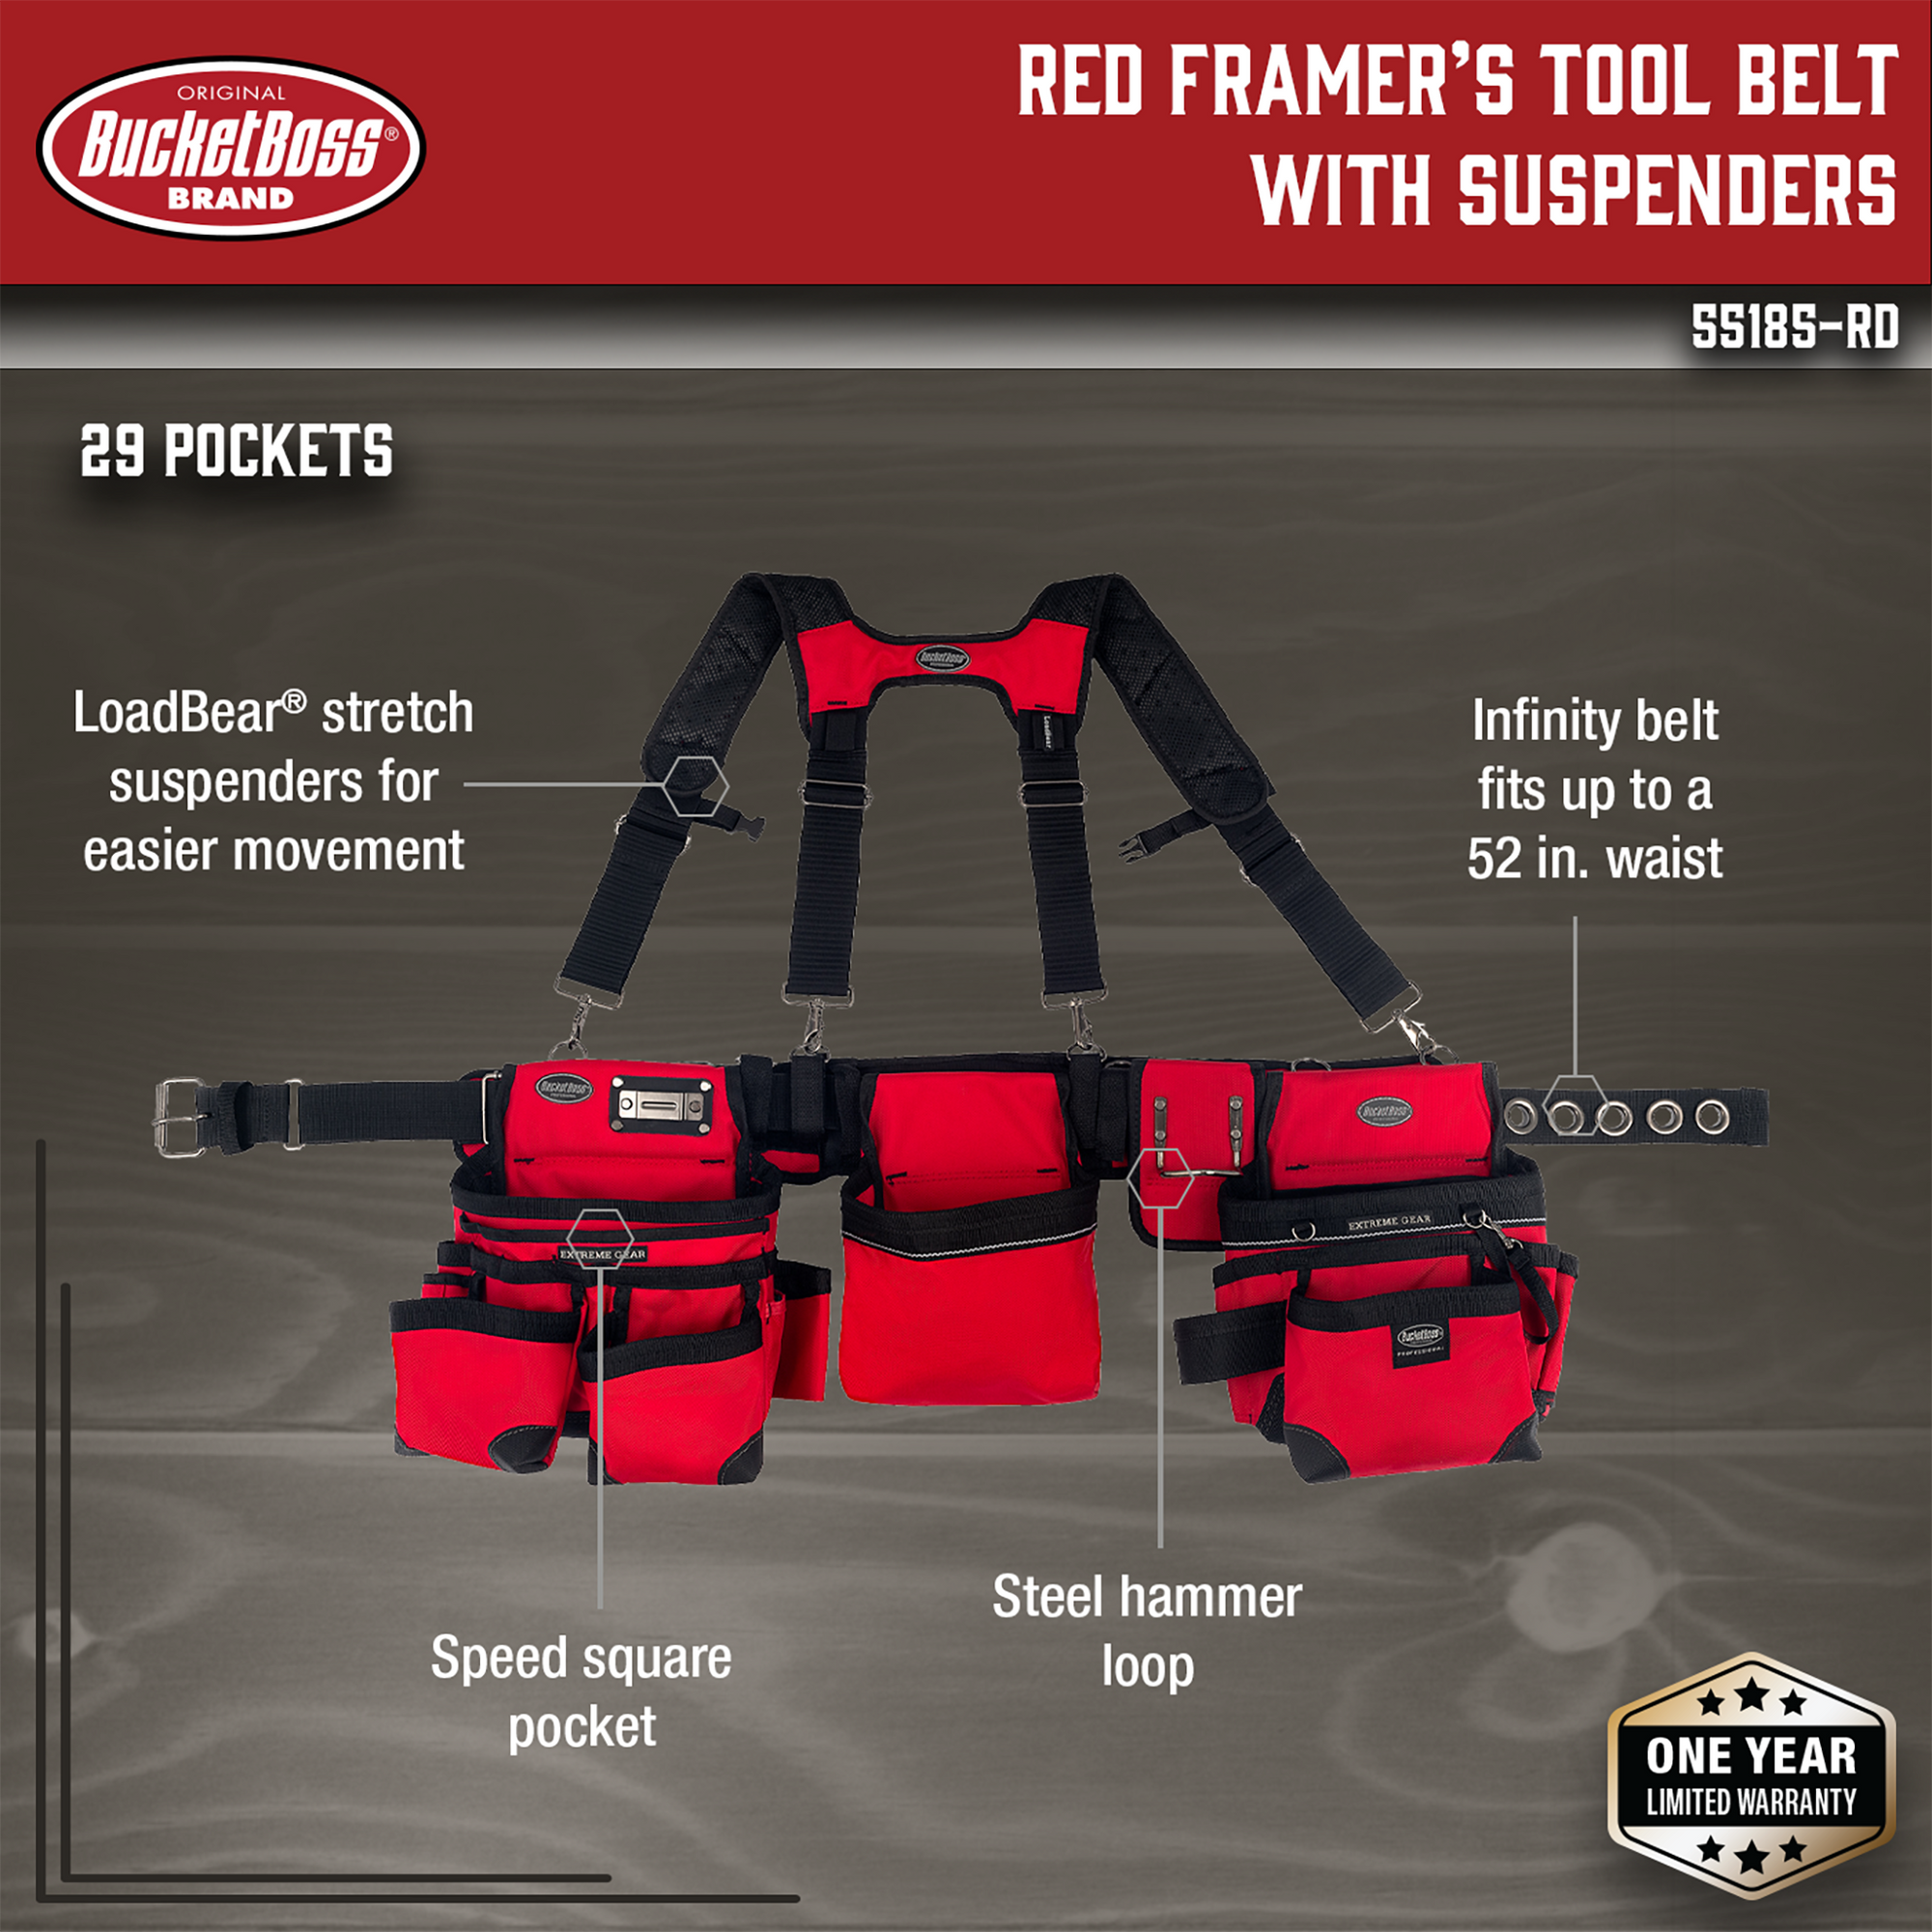 Red Framer's Tool Belt with Suspenders